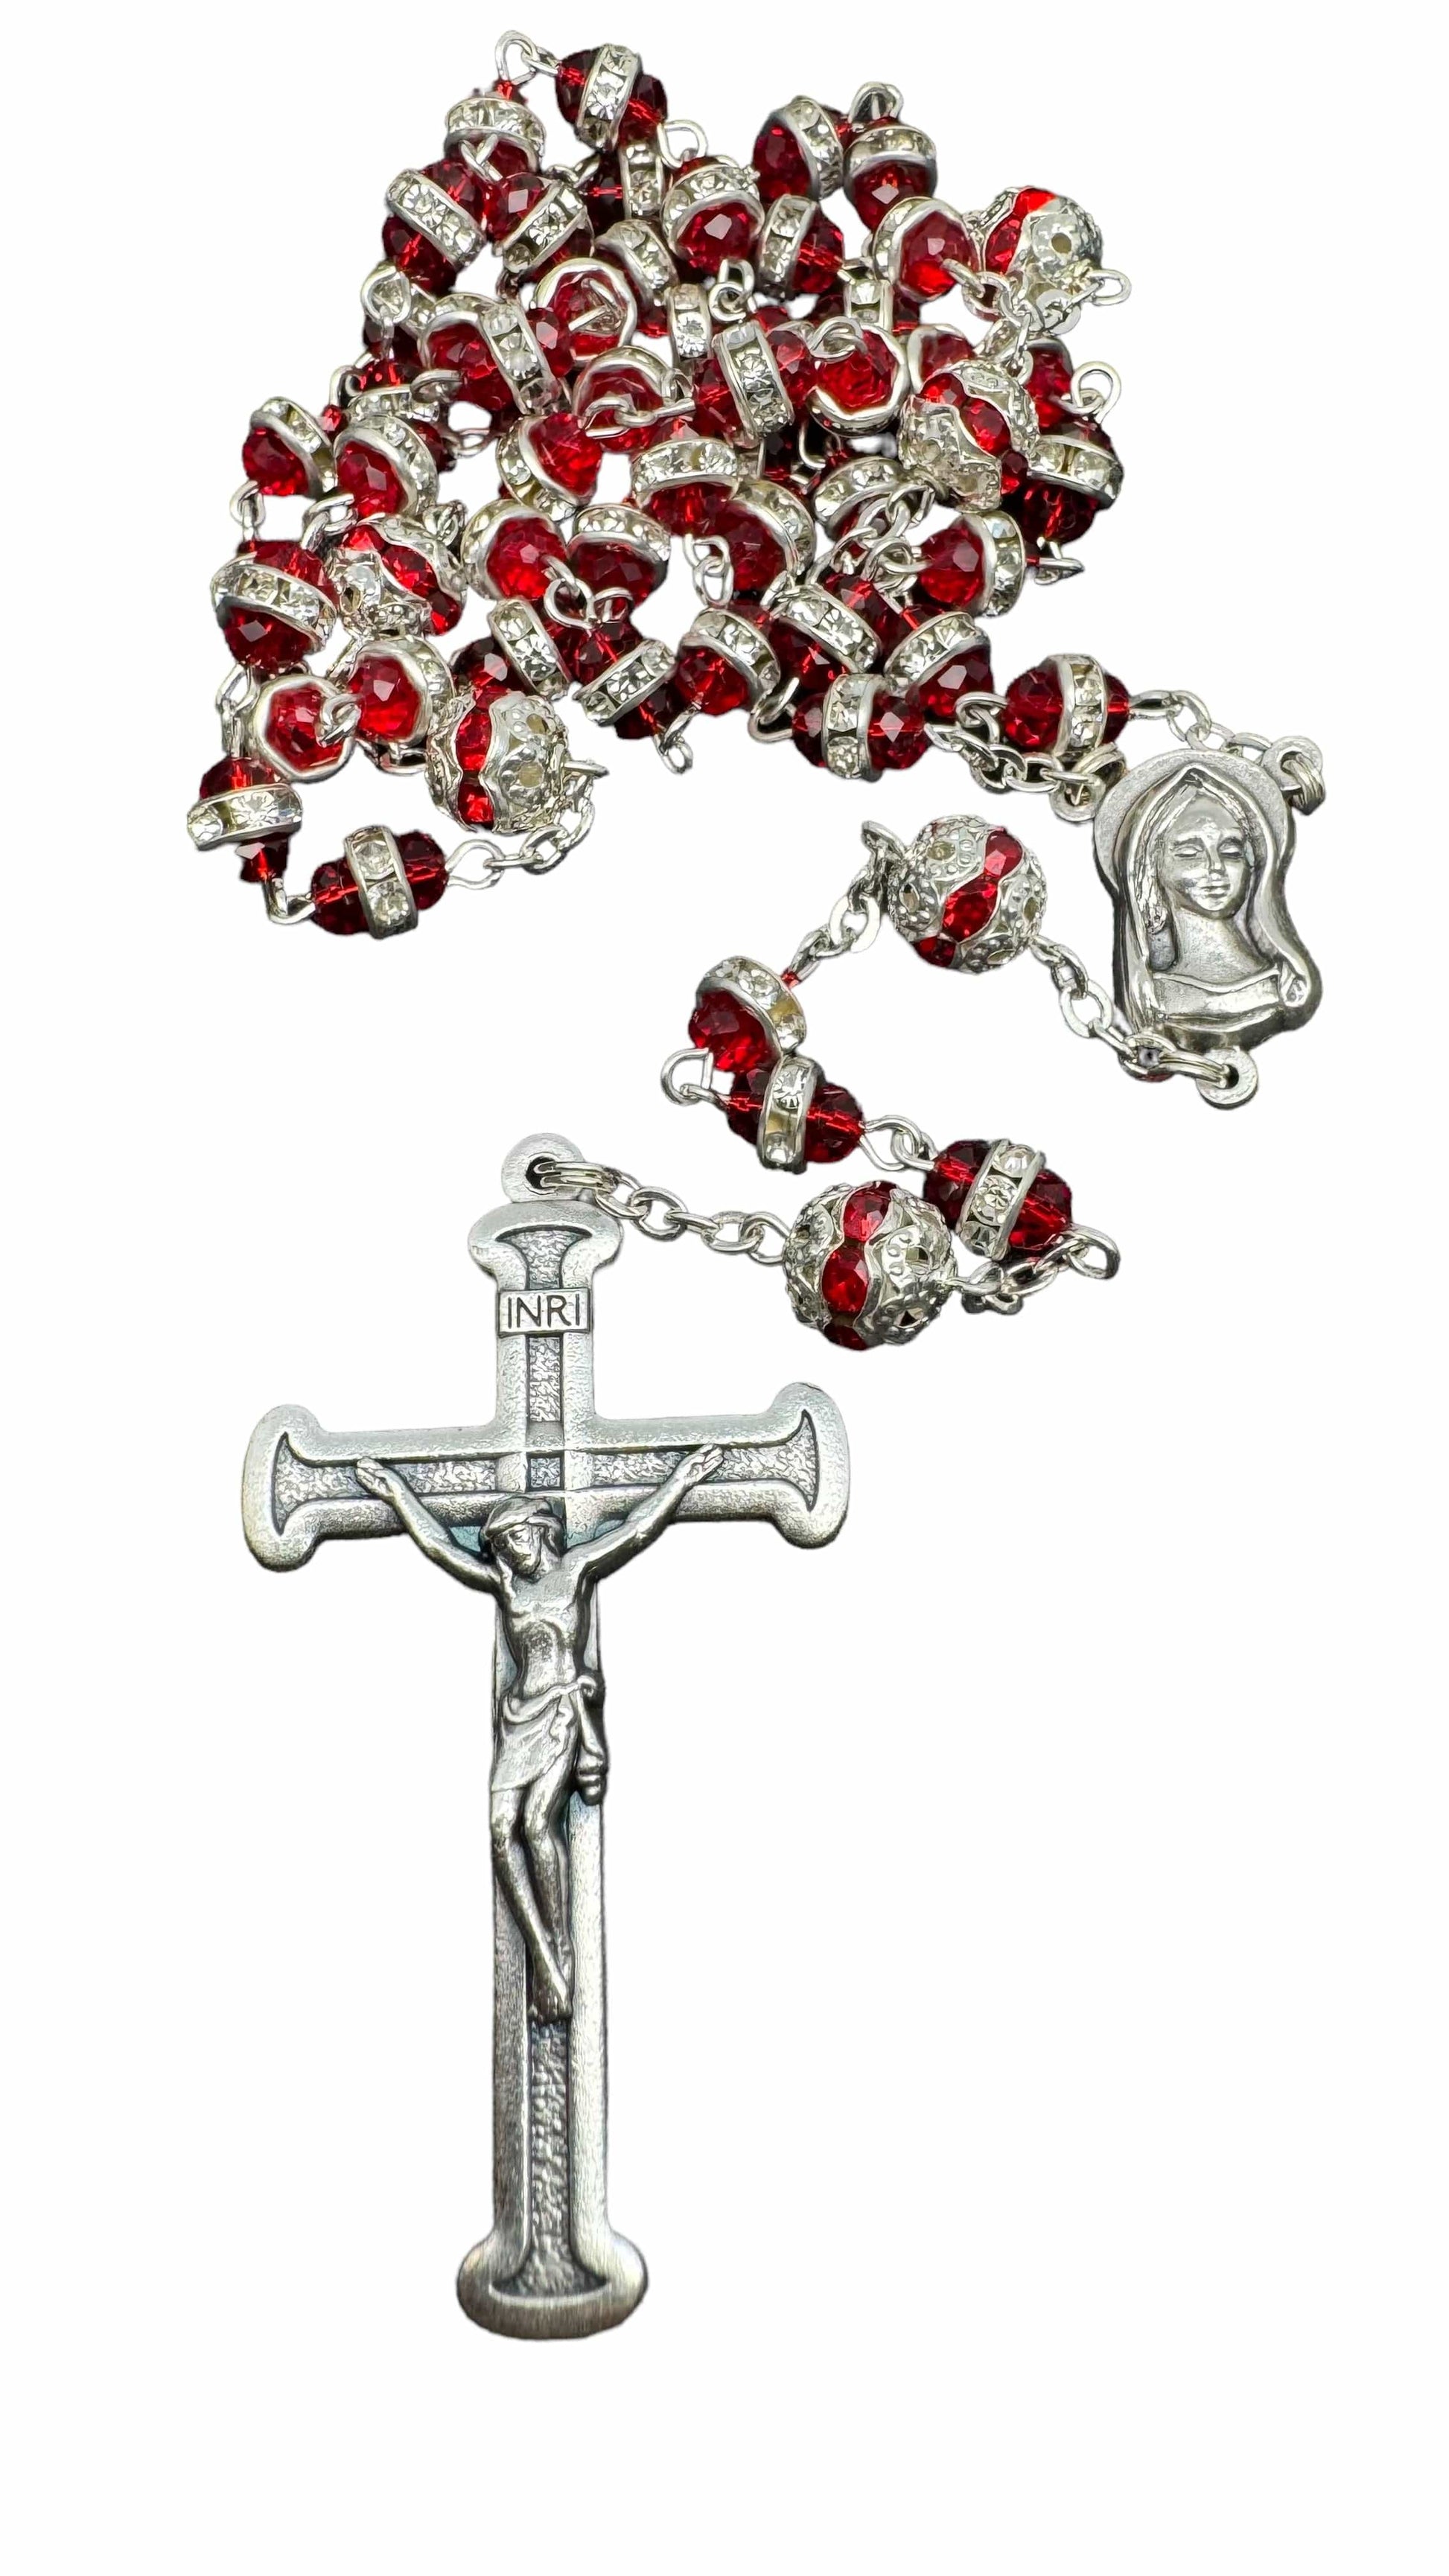 Catholically Rosaries Blessed Virgin Mary - Red Shiny Crystal Rosary - Rhinestone - Blessed By Pope